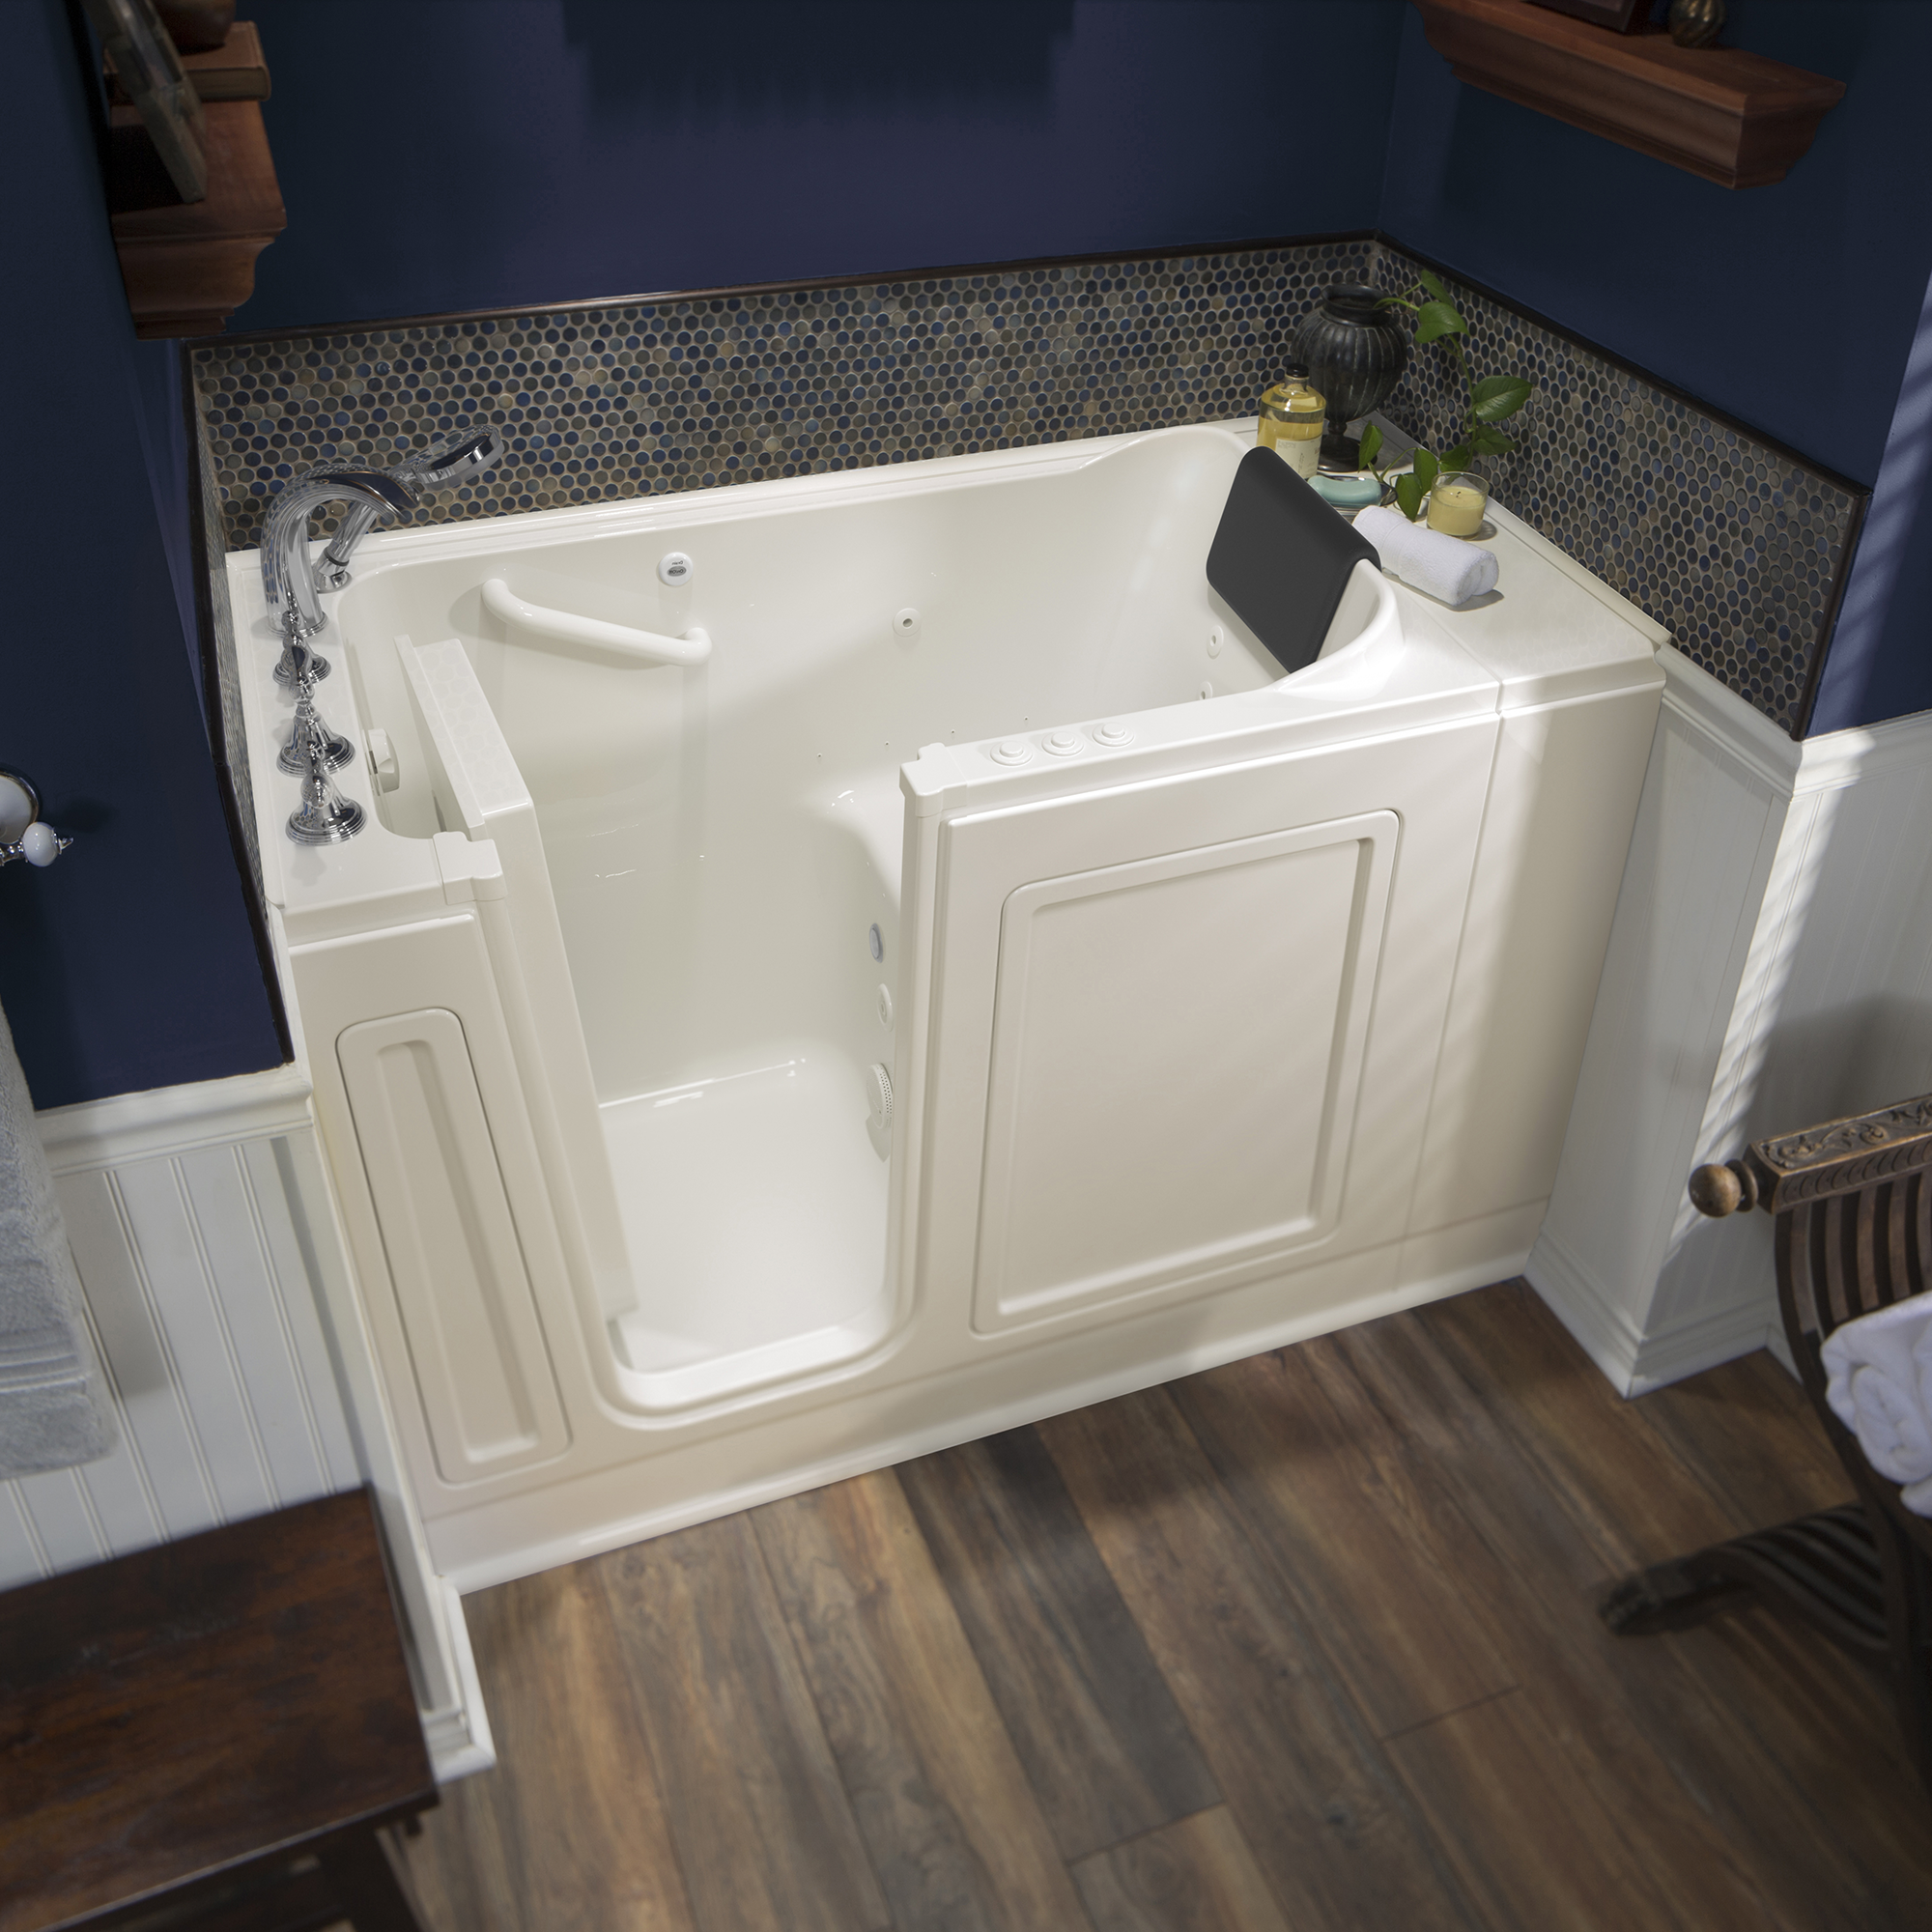 Acrylic Luxury Series 28 x 48-Inch Walk-in Tub With Combination Air Spa and Whirlpool Systems - Left-Hand Drain With Faucet